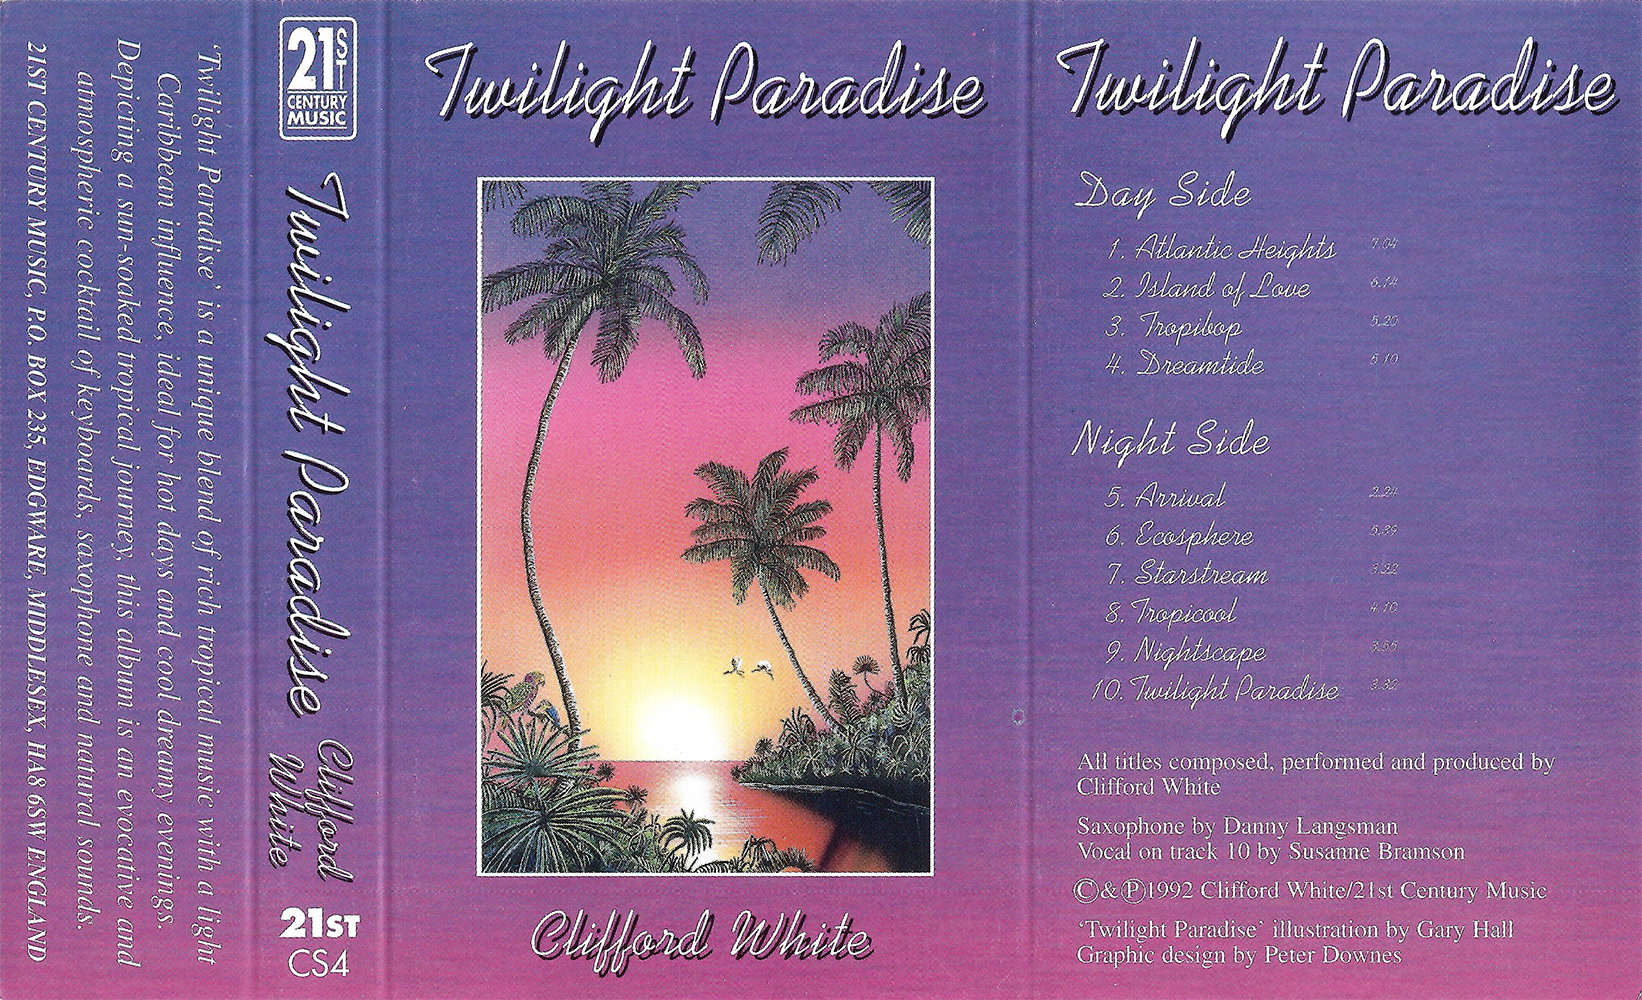 Twilight Paradise by Clifford White